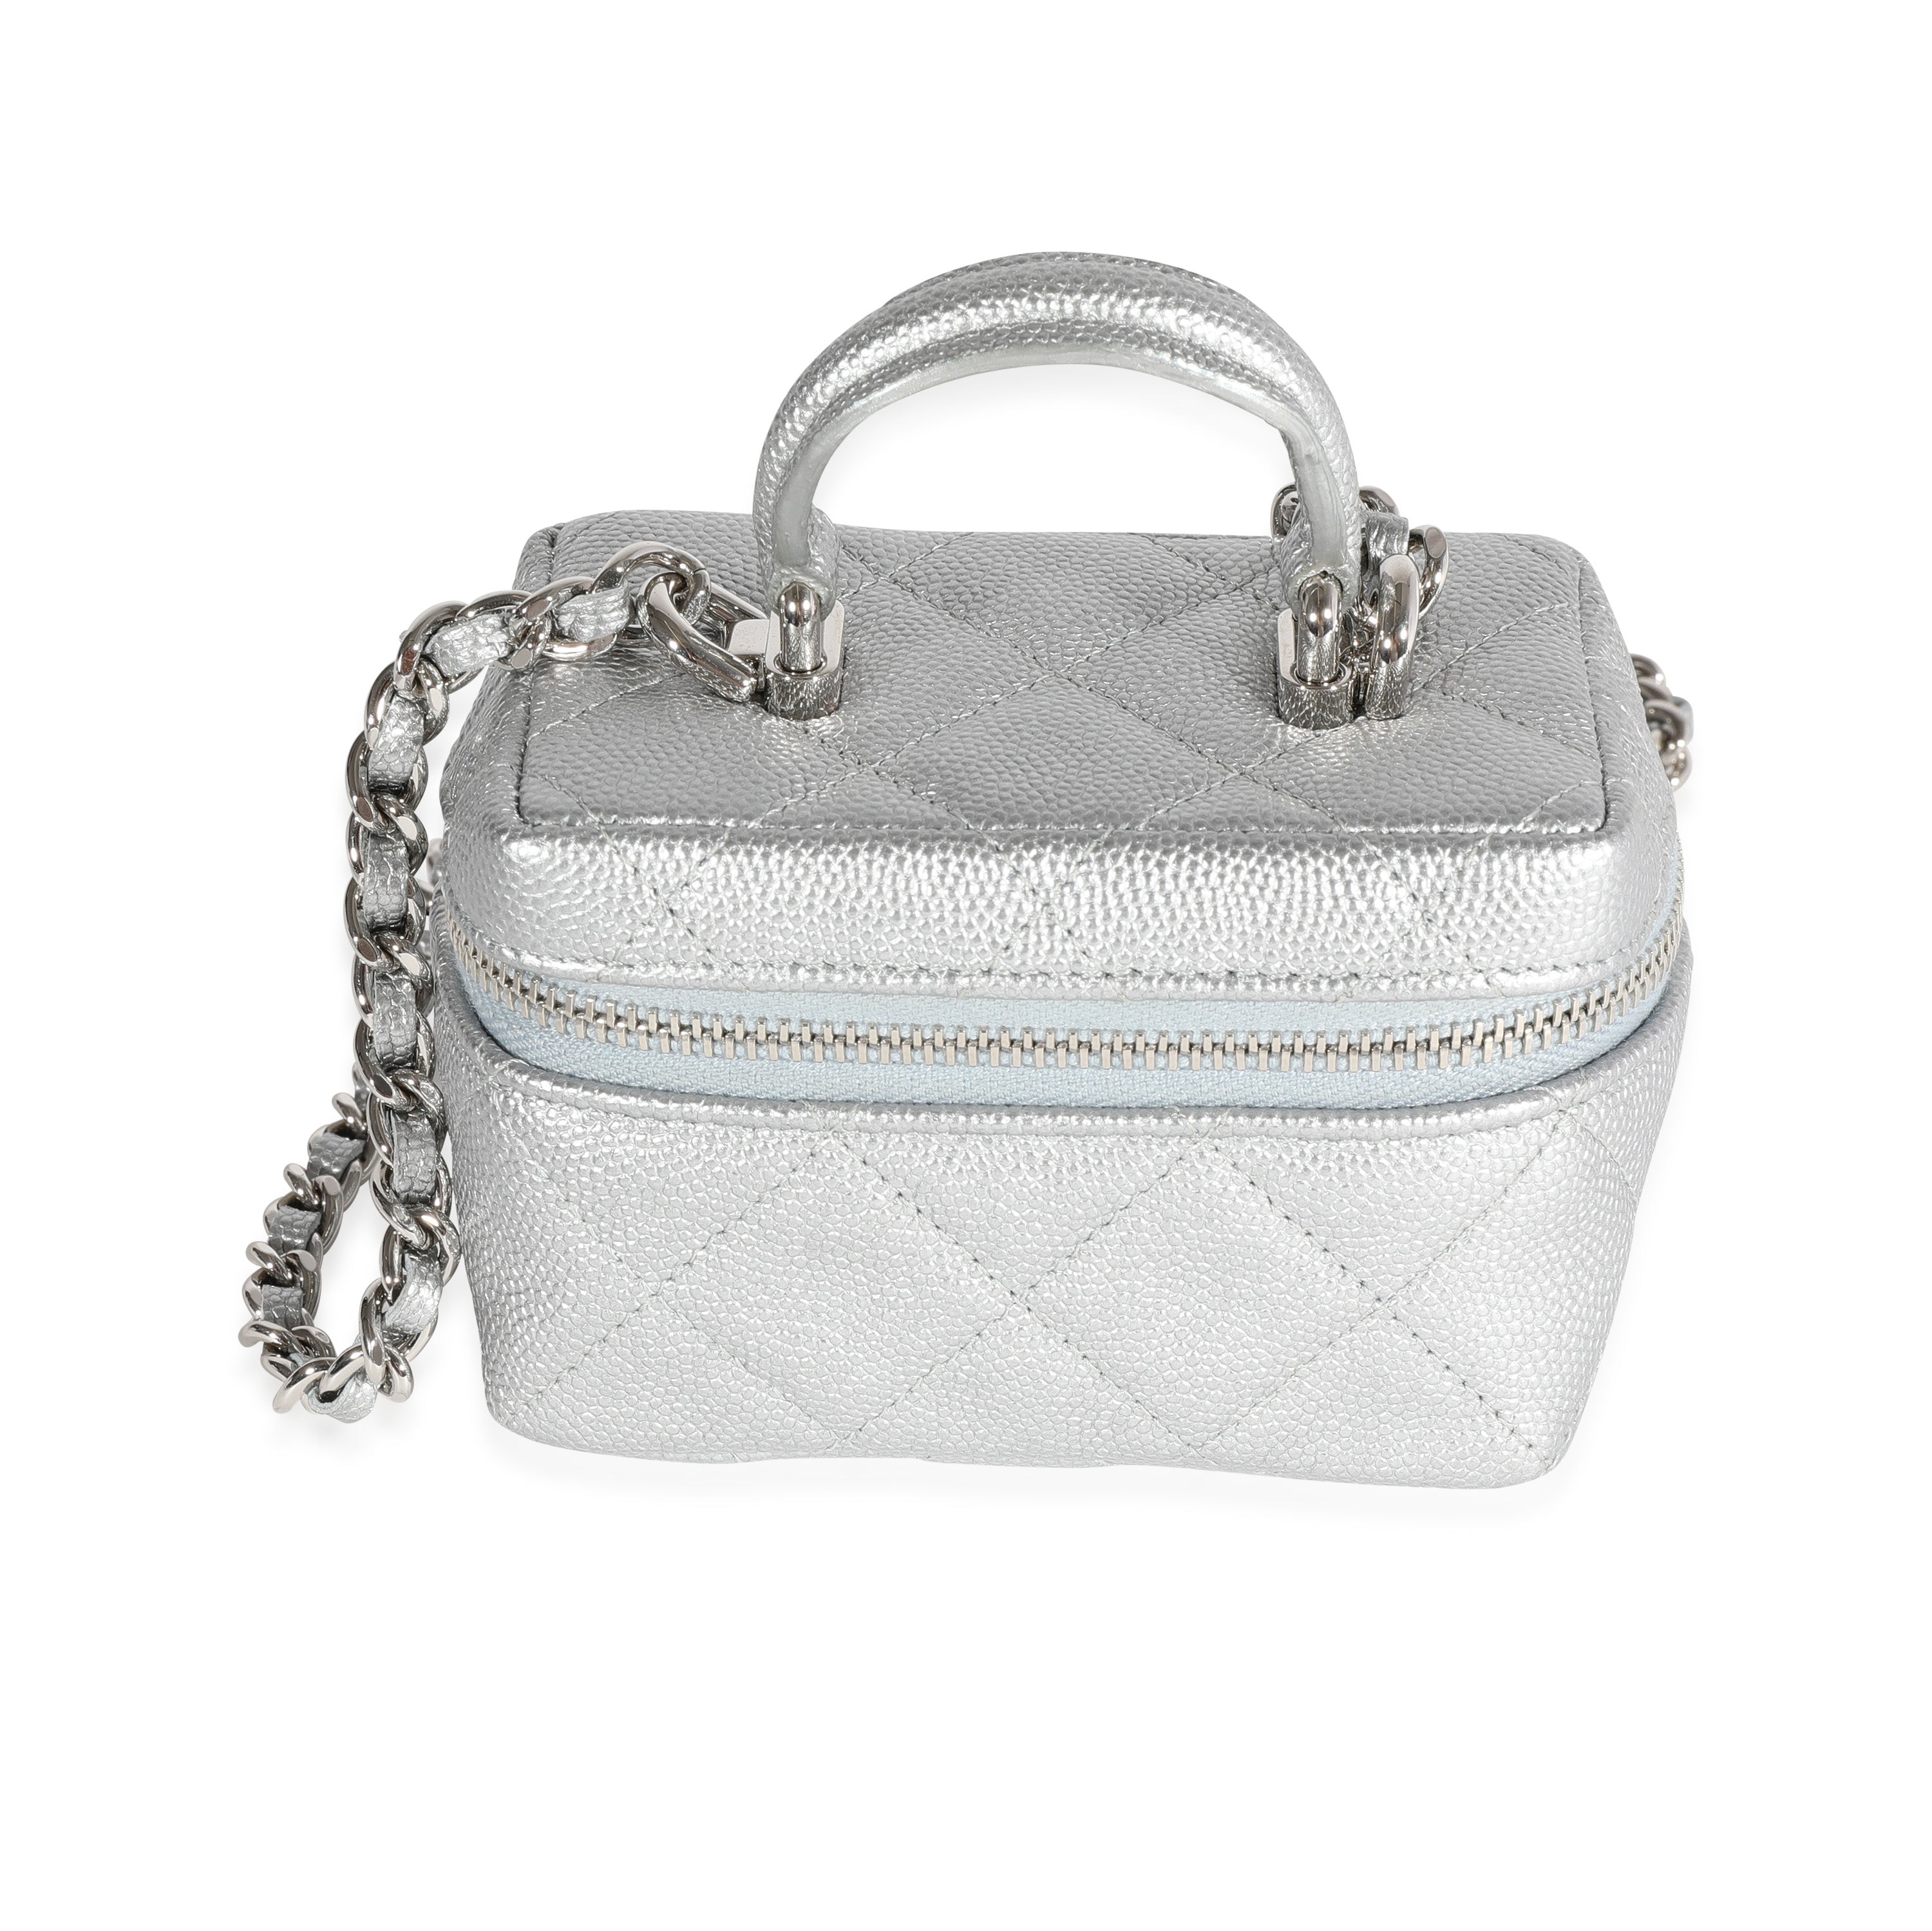 Chanel Silver Metallic Quilted Caviar Mini Vanity Bag With Chain, myGemma